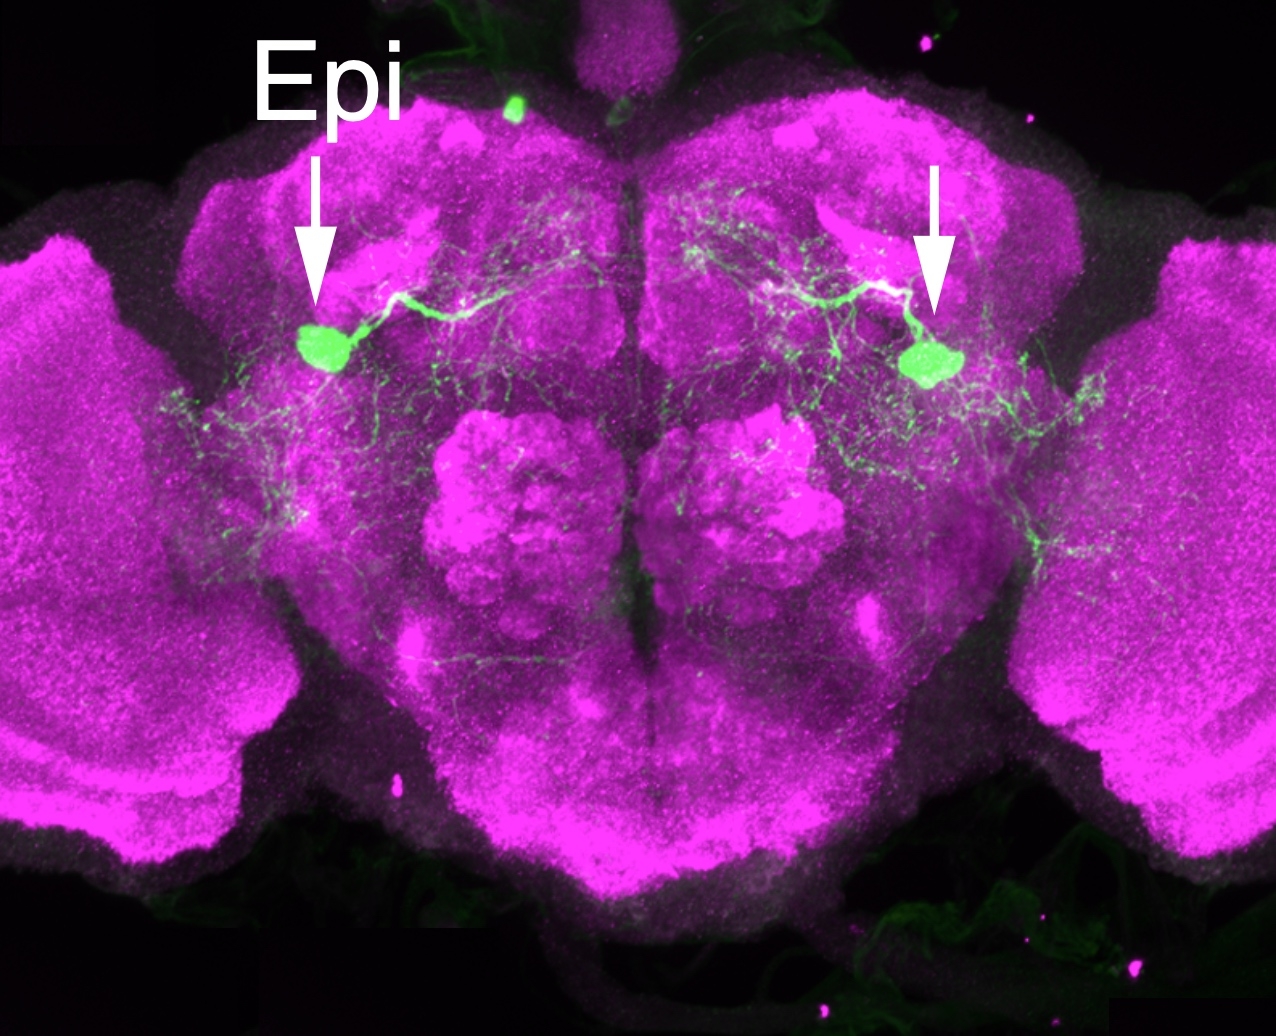 Two neurons fluoresce bright green against the magenta color of the rest of the brain.